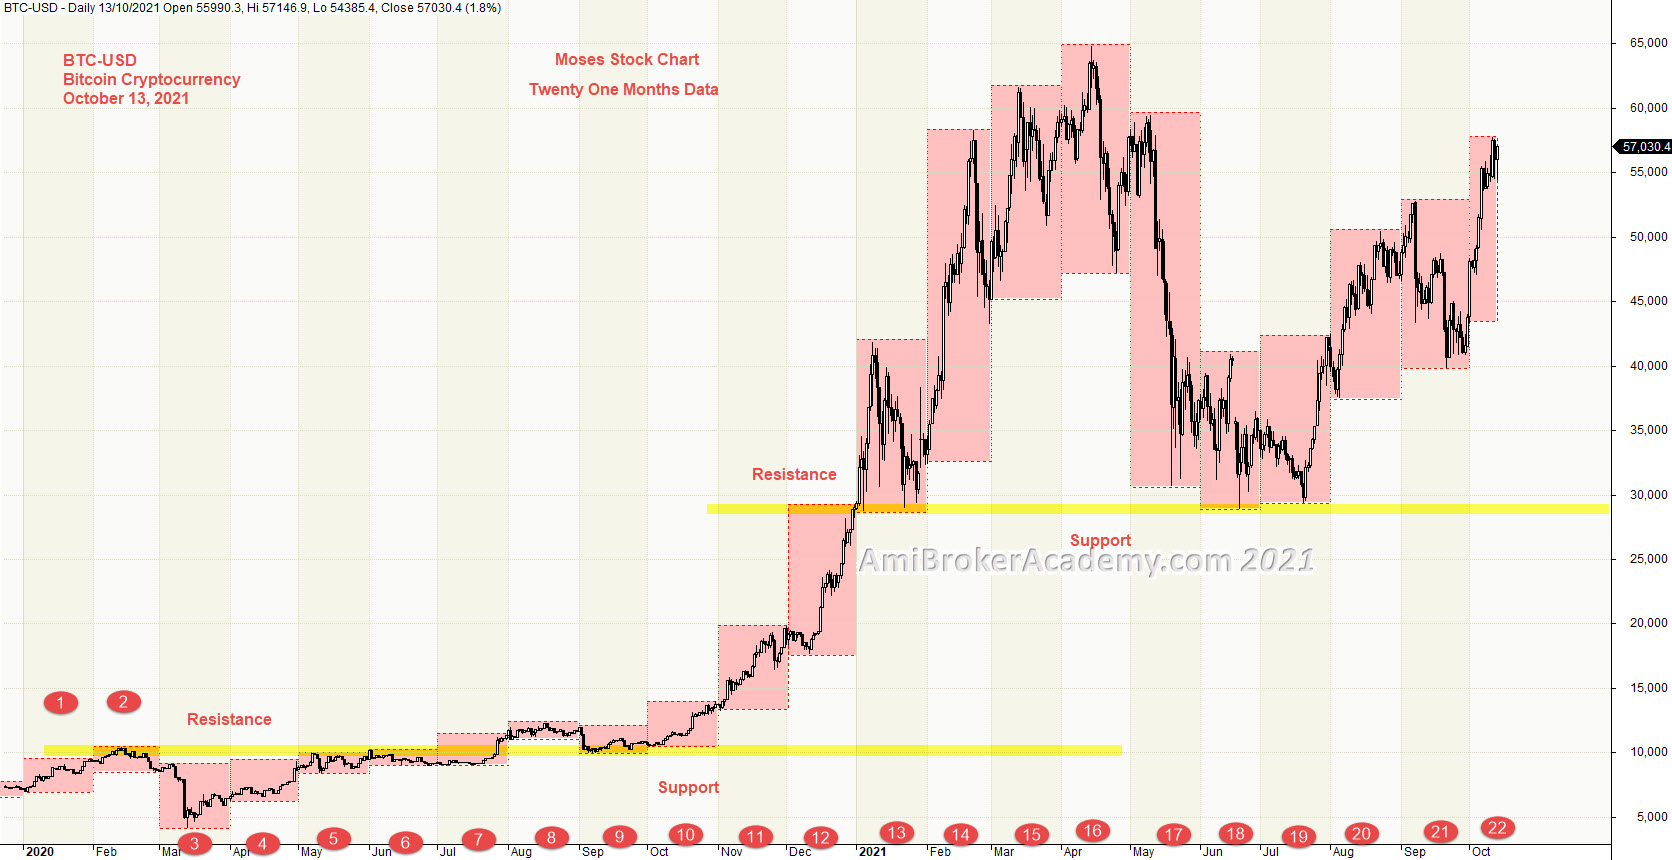 Bitcoin Cryptocurrency and Twenty Months Dat, BTC
